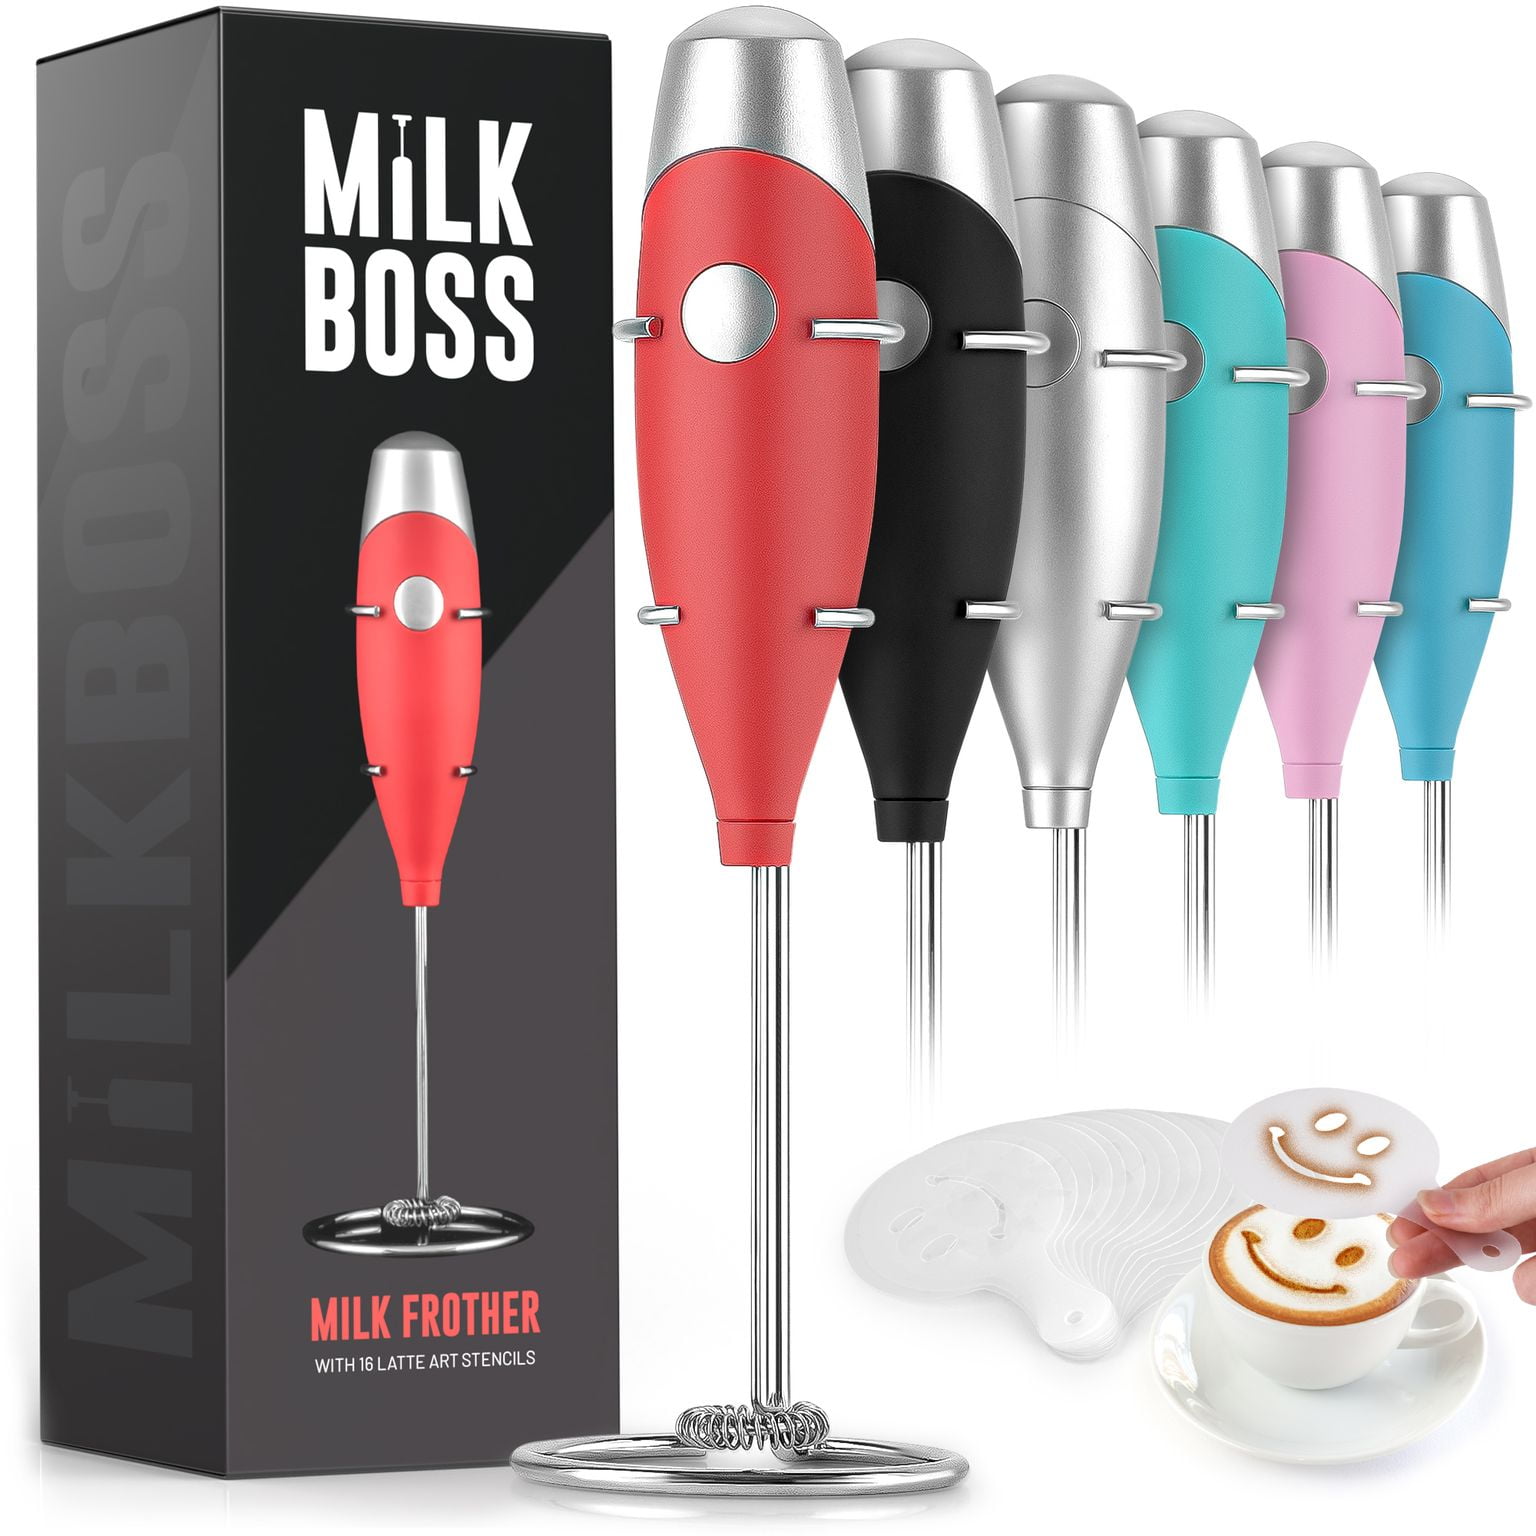  Milk Boss Powerful Milk Frother Handheld With Upgraded